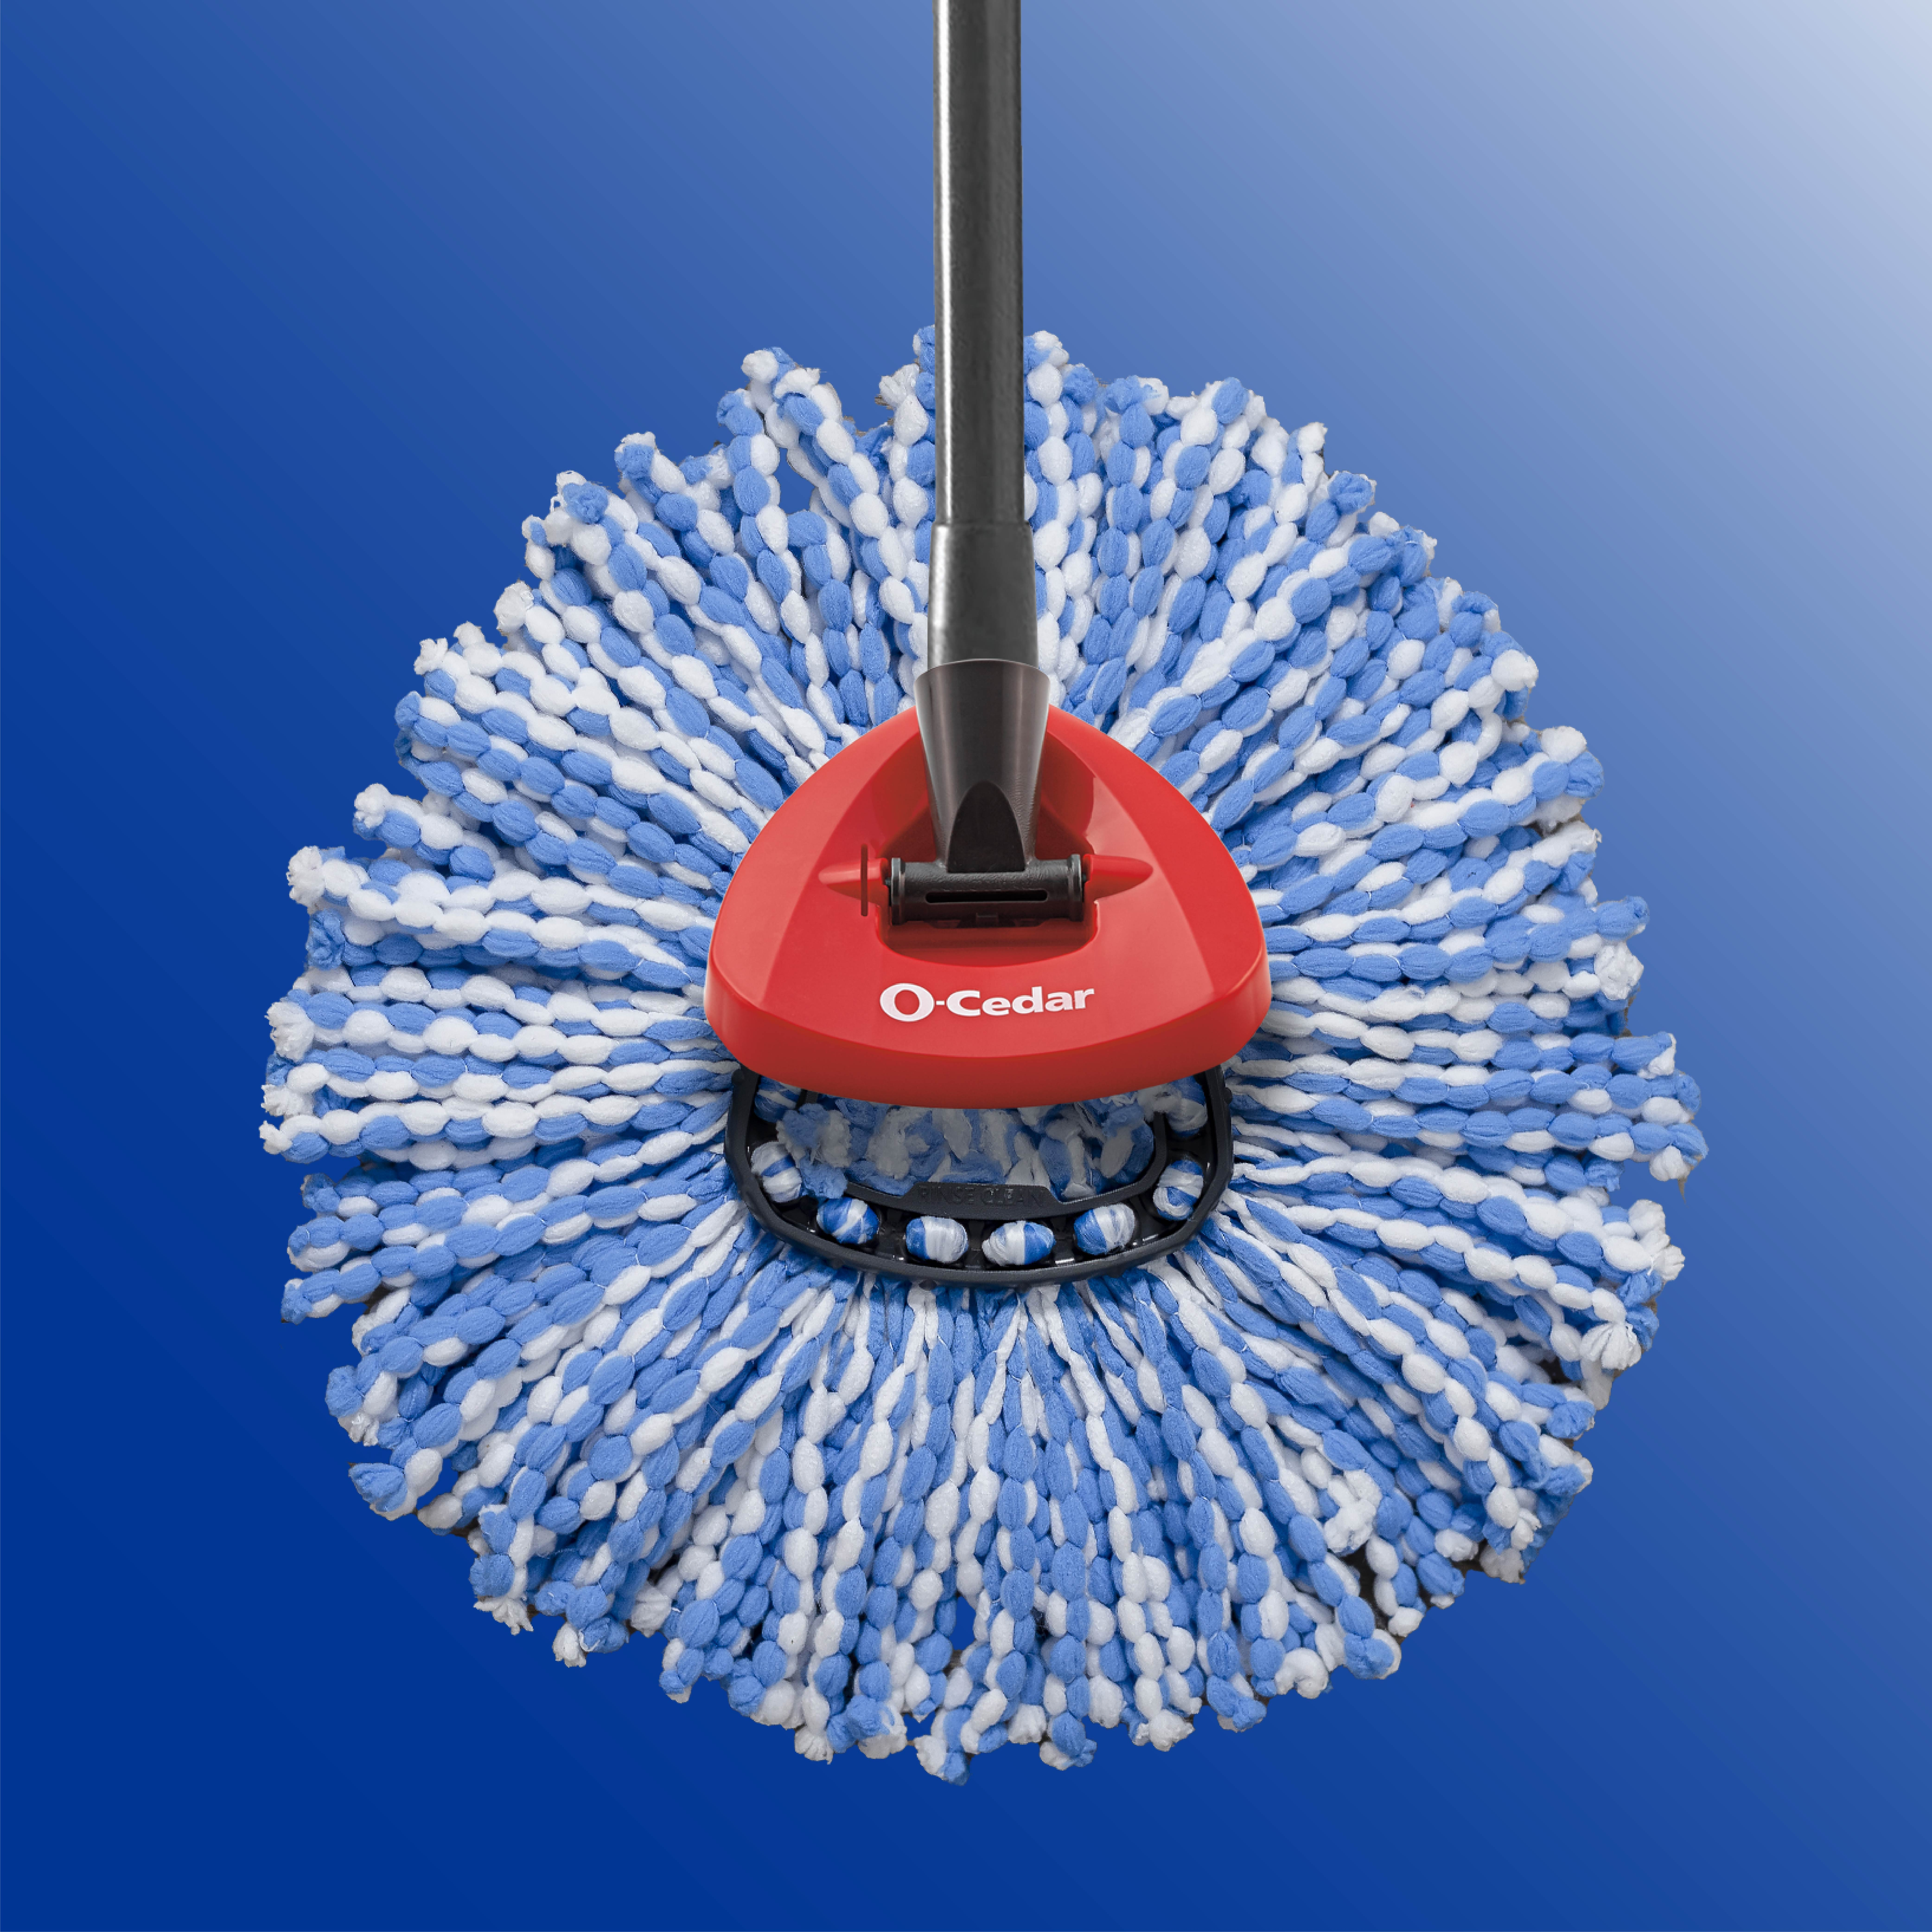 O-Cedar EasyWring RinseClean Spin Mop and Bucket System, Hands-Free System - image 11 of 25